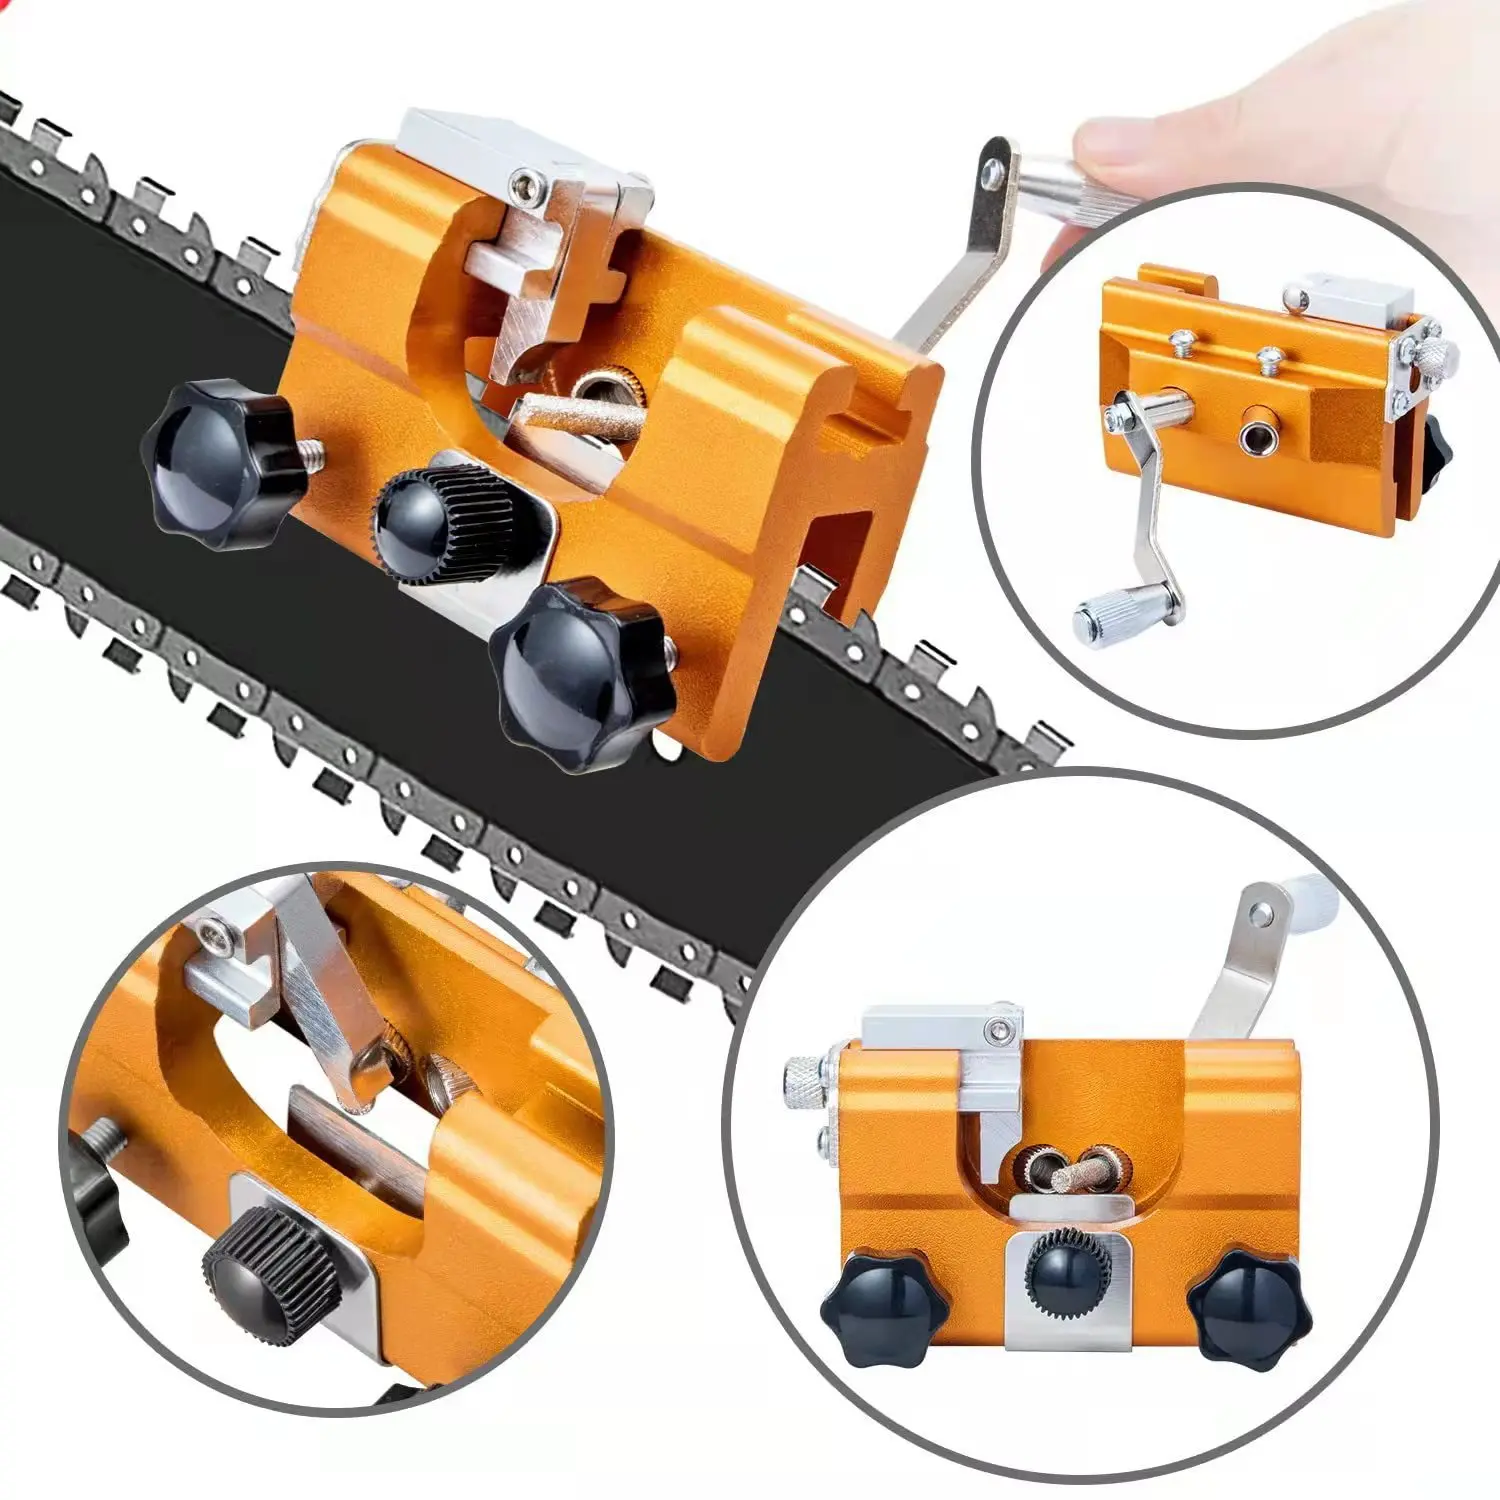 

Chainsaw Sharpener Kit DIY Woodworking Tool Chainsaw Chain Sharpening Jig Suitable for All Kinds of Chain Saws and Electric Saws